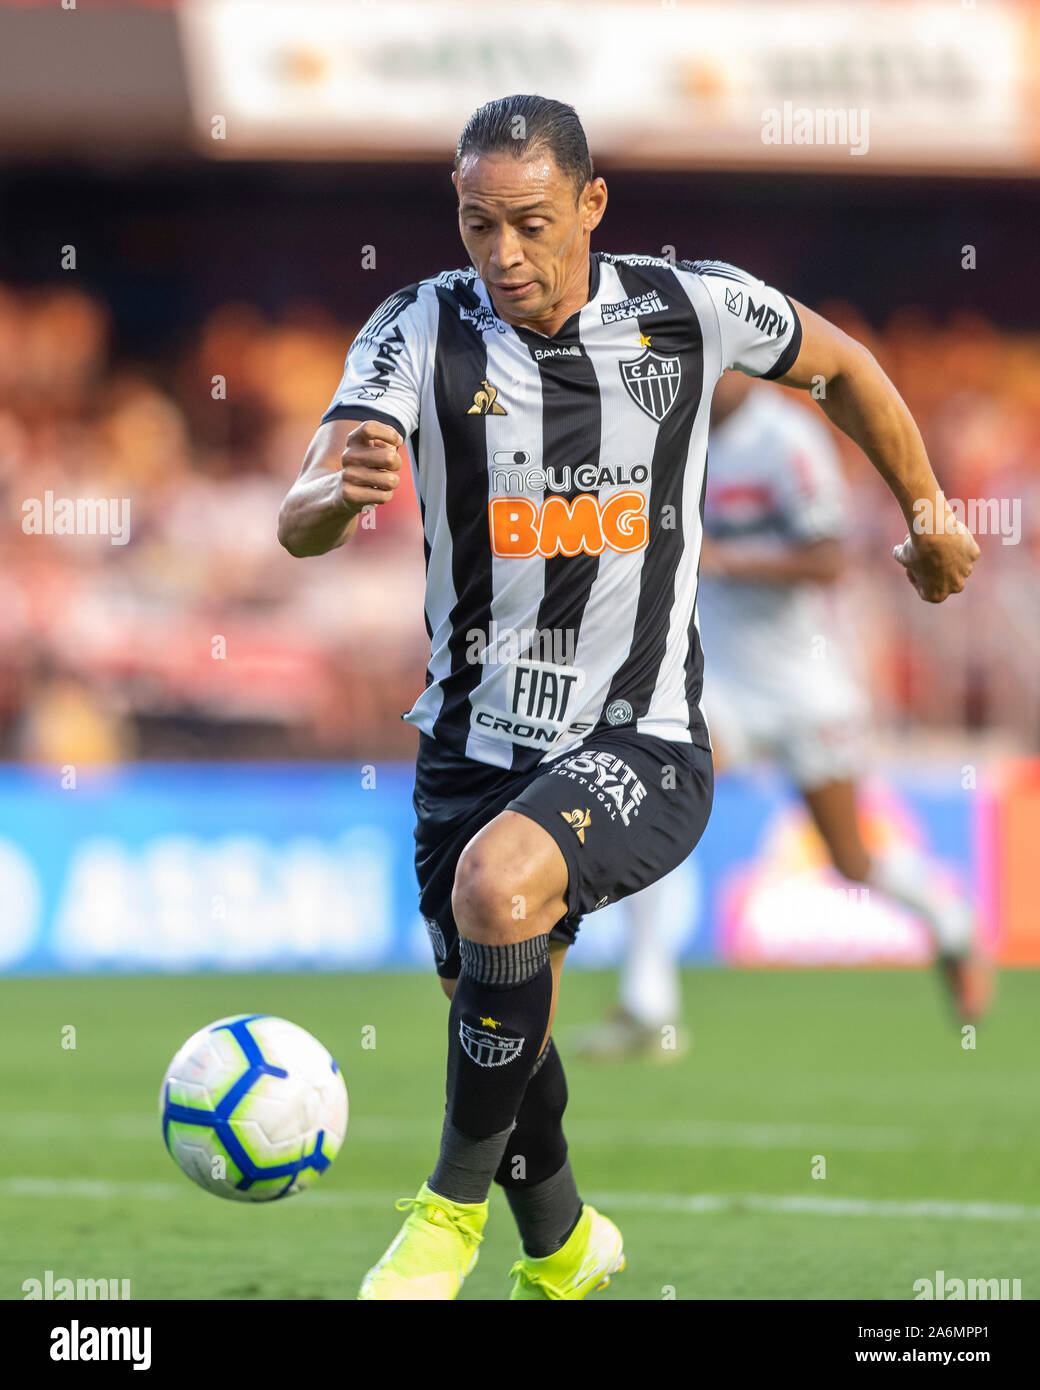 Sao Paulo, Brazil. October 27th 2019:  Atletico striker Ricardo Oliveira during his club's game against Sao Paulo. The game won by Sao Paulo 2-0 took place at Morumbi Stadium in Sao Paulo and was for the 28th round of the Brazilian league known as 'Campeonato Brasileiro'. Stock Photo